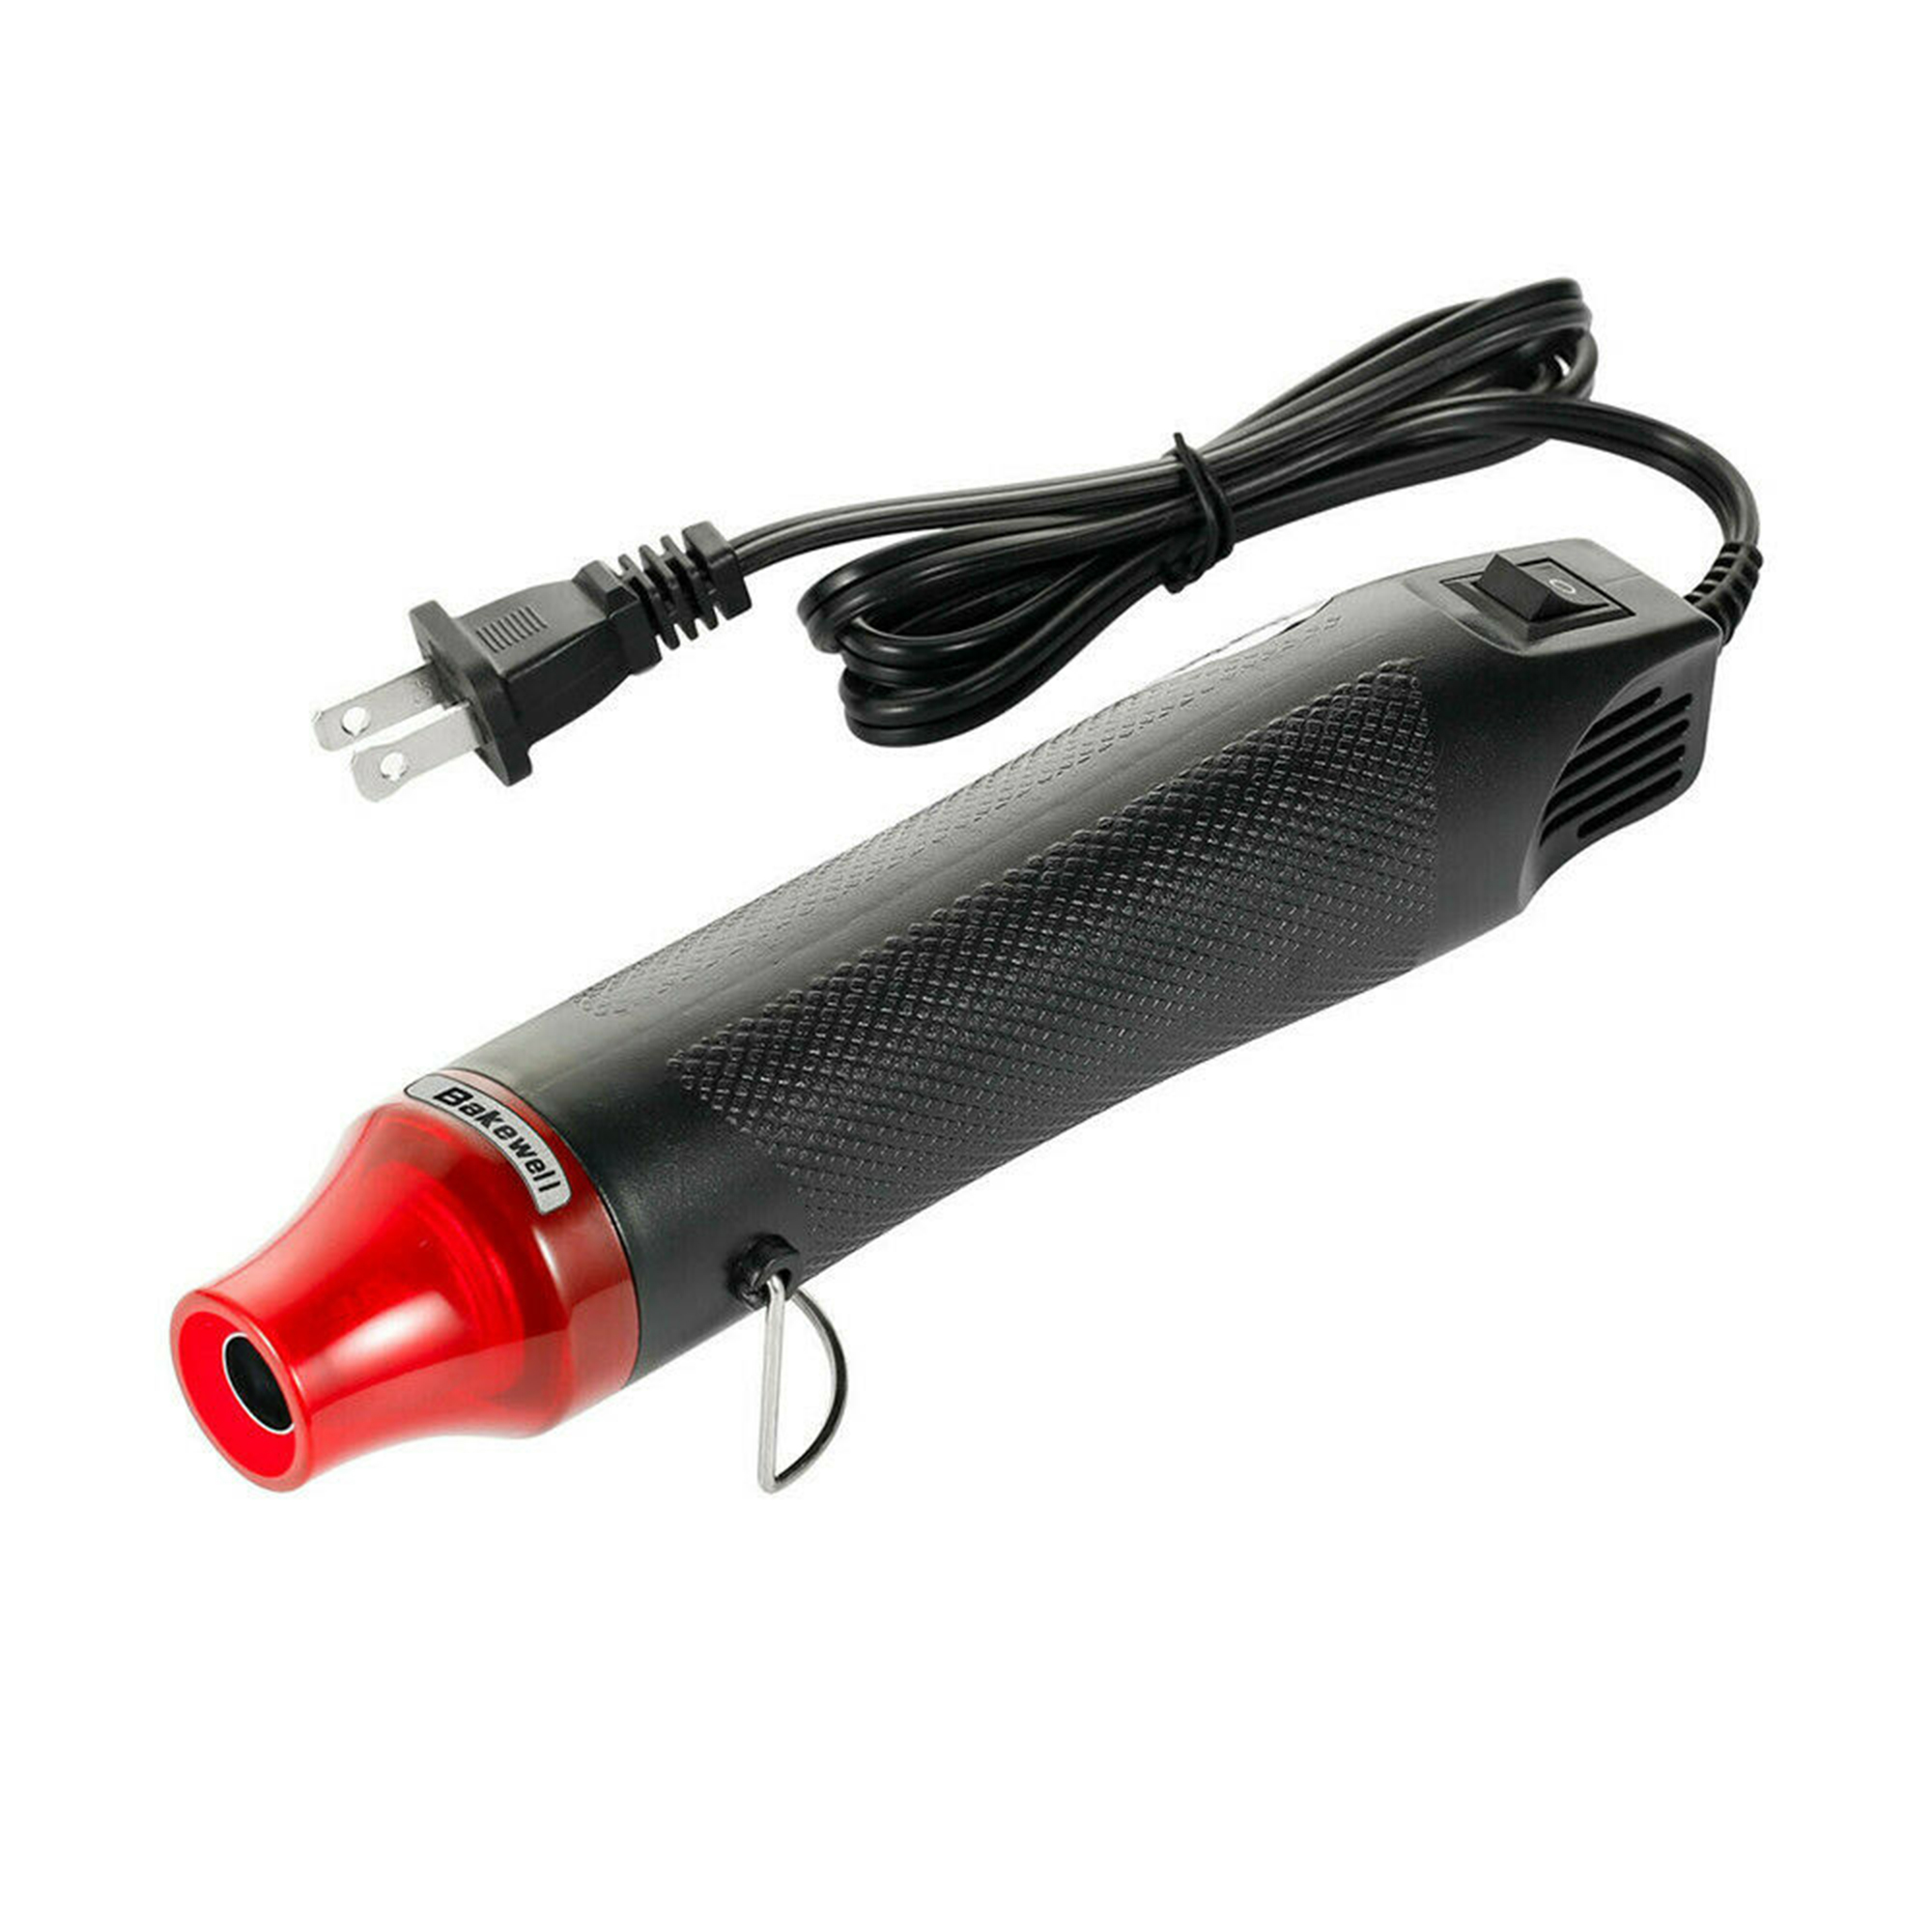 DODOING Heat Gun for Crafts, Mini Heat Gun for Epoxy Resin, 300W Portable  DIY Acrylic Resin Craft, Dryer Crafts Heat Tool for Cup Turner, Shrink